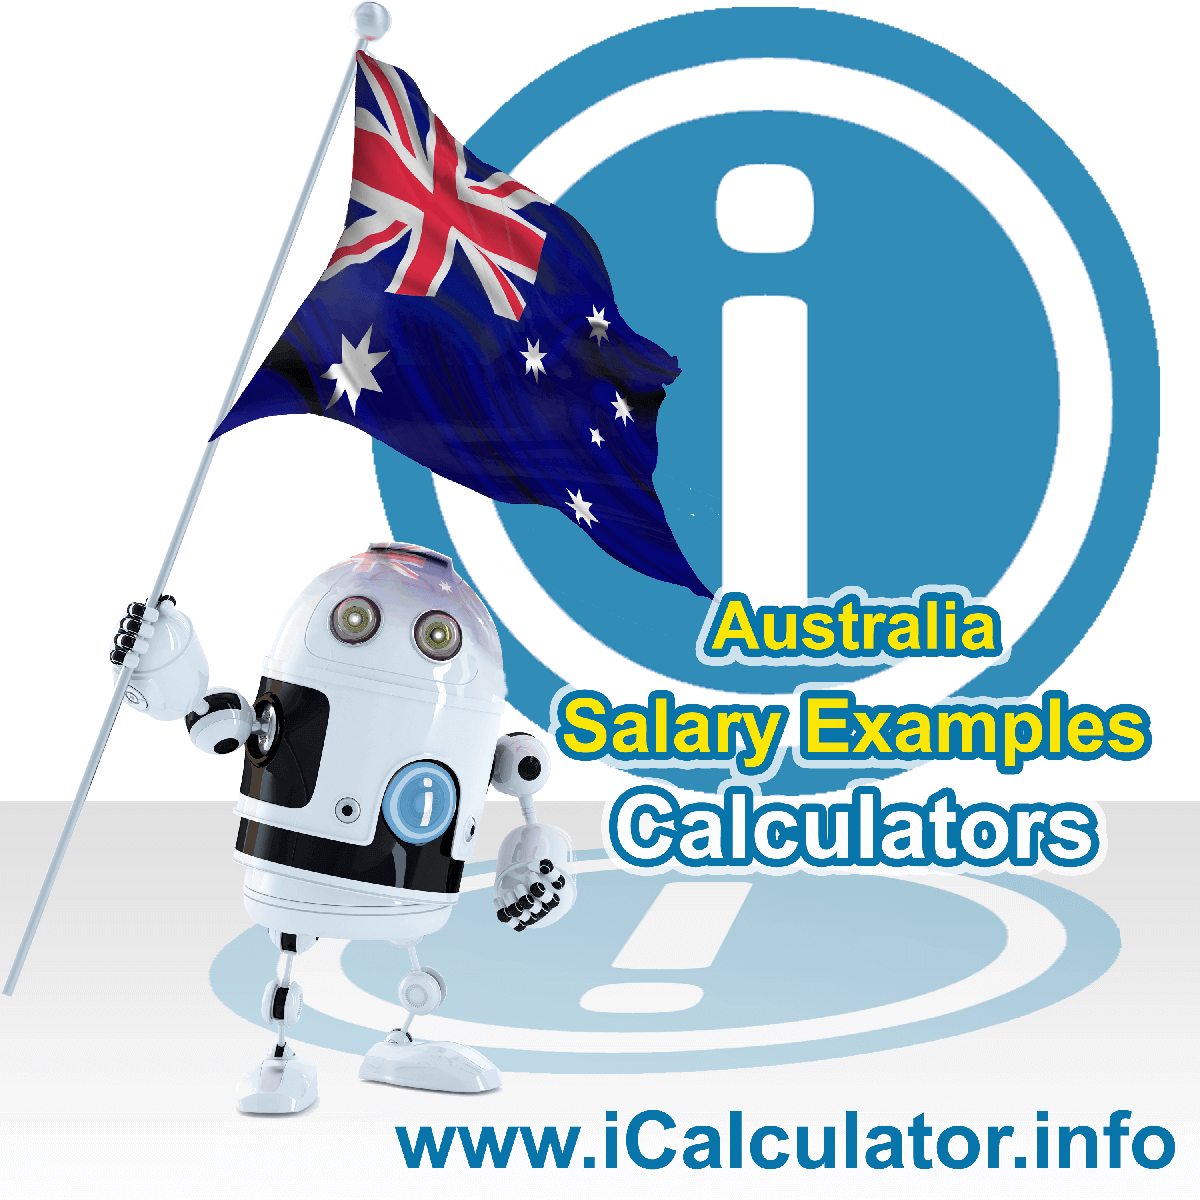 Australia Salary Example for $200.05k. This image shows the Australian flag and information relating to the tax formula used for calculating income tax in Australia using the Australia Tax Calculator in 2023